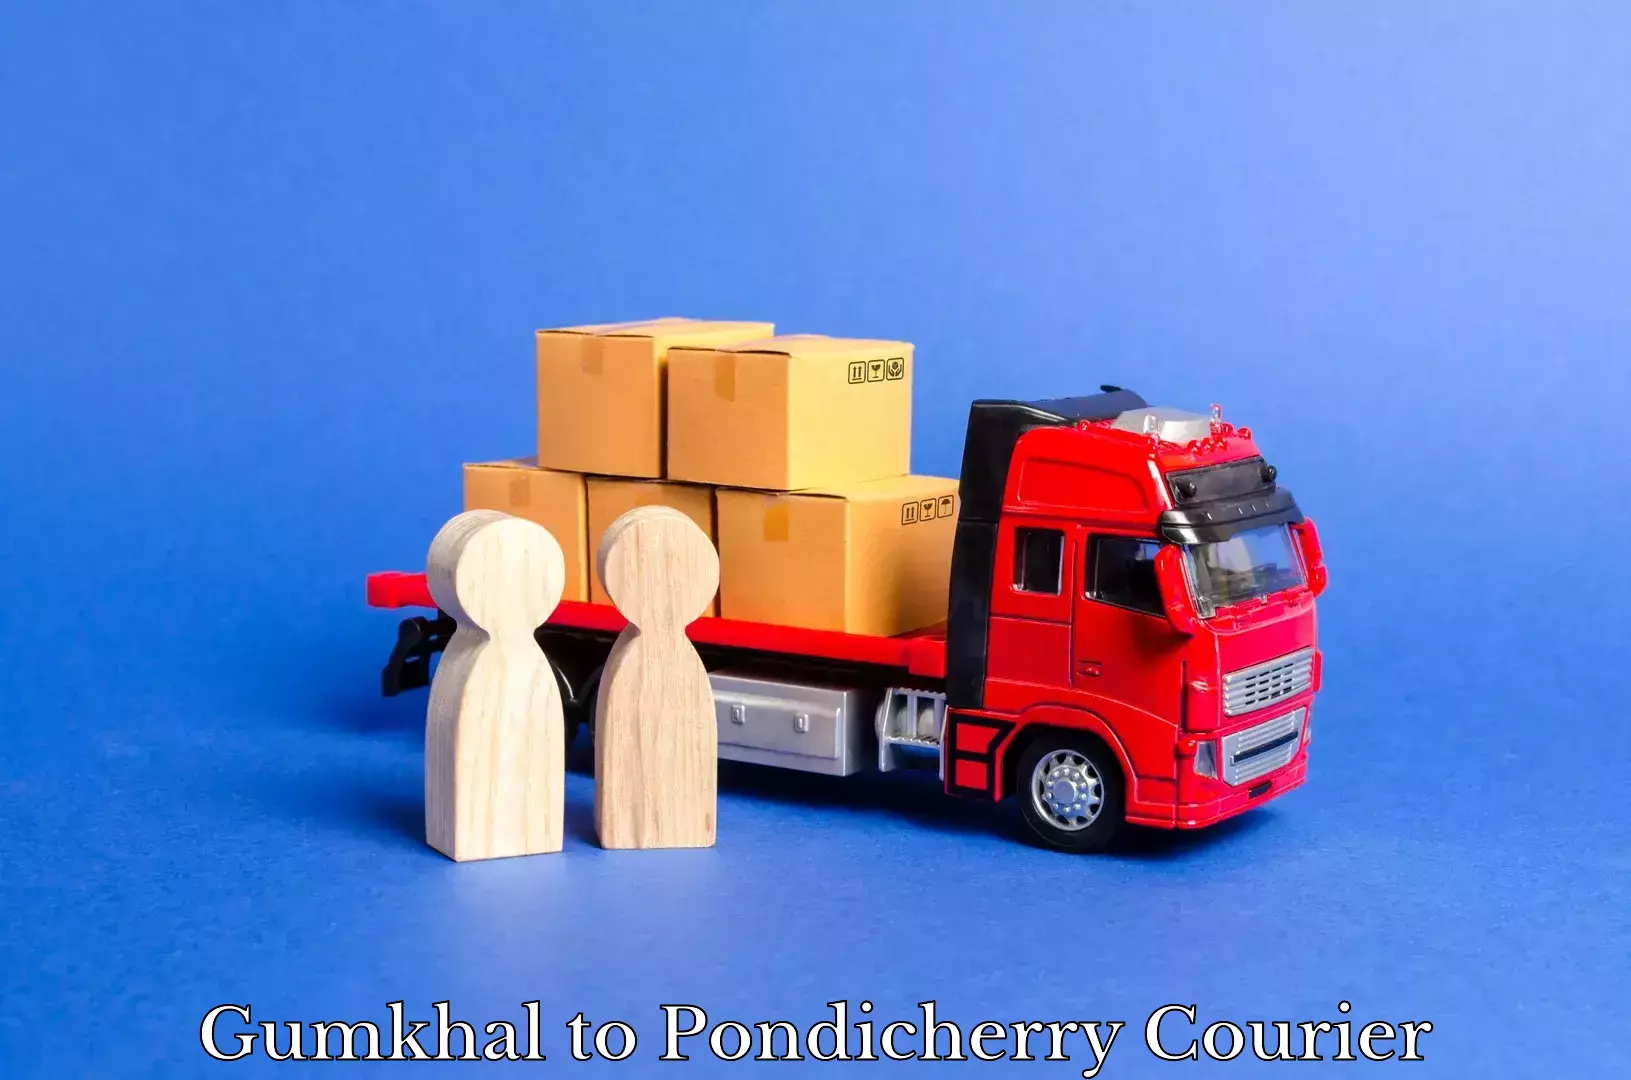 Reliable delivery network Gumkhal to Pondicherry